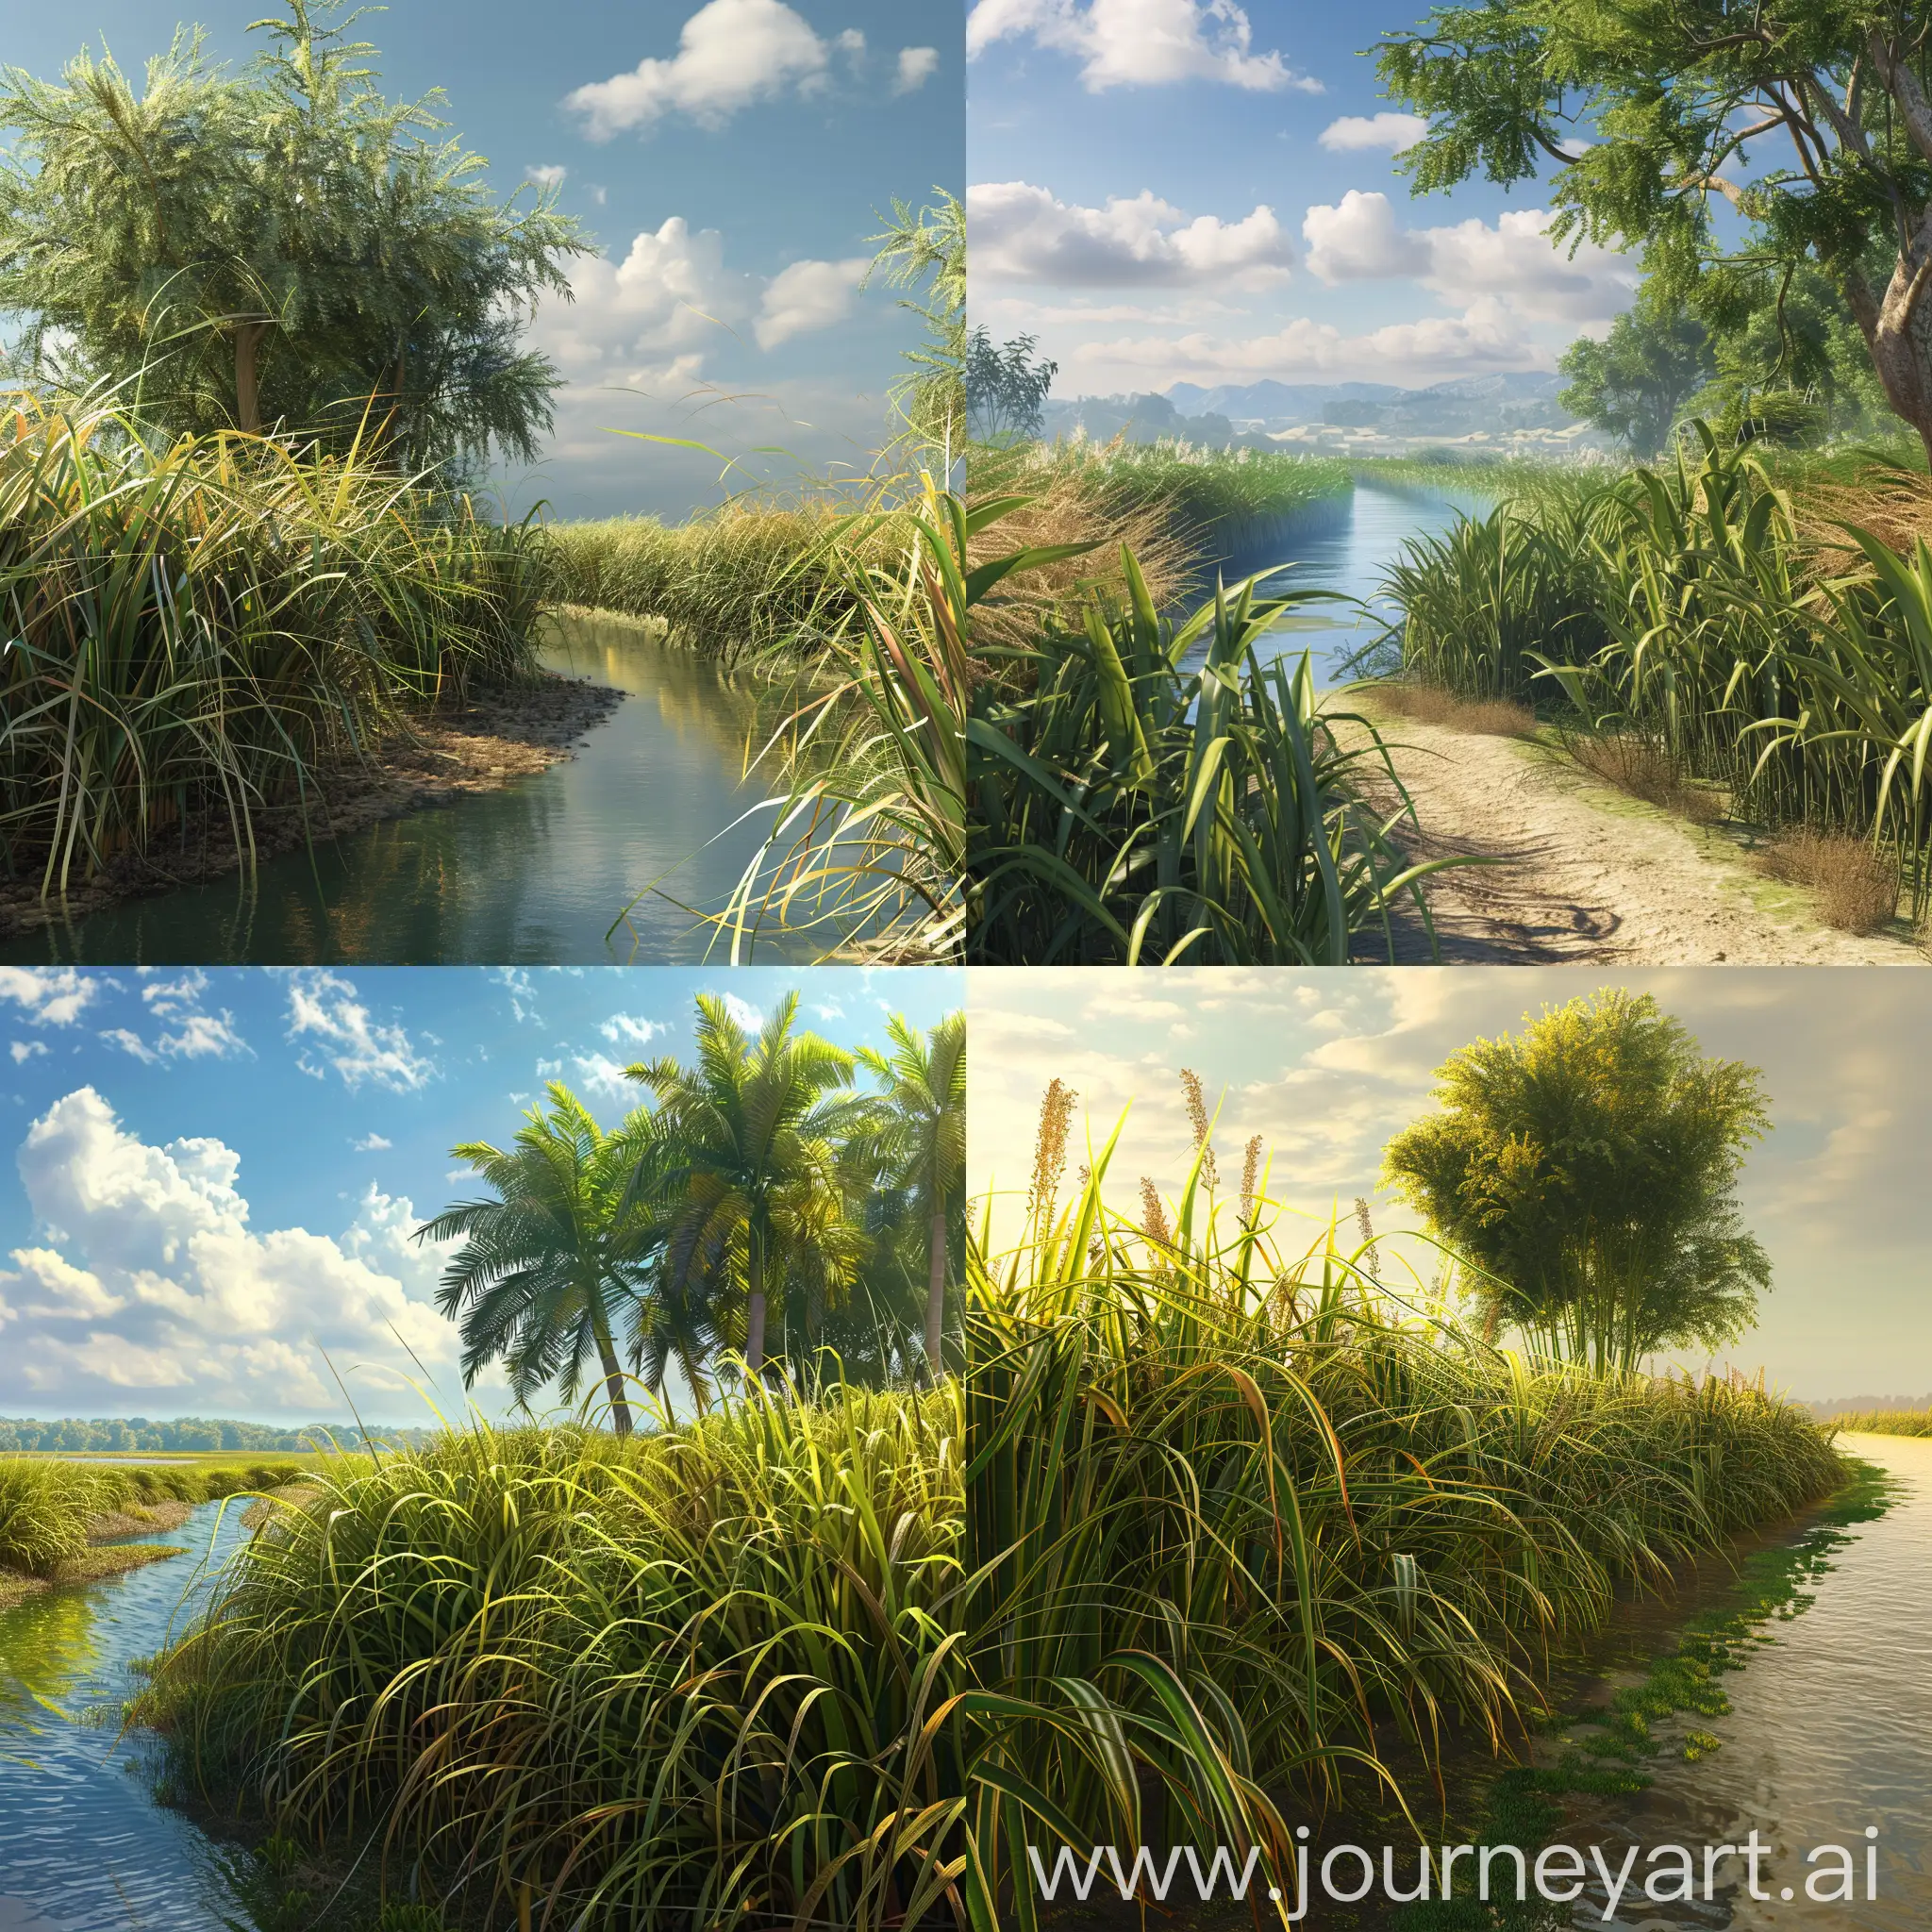 Sunlit-Sugarcane-Fields-by-the-Riverside-in-Photorealistic-Detail